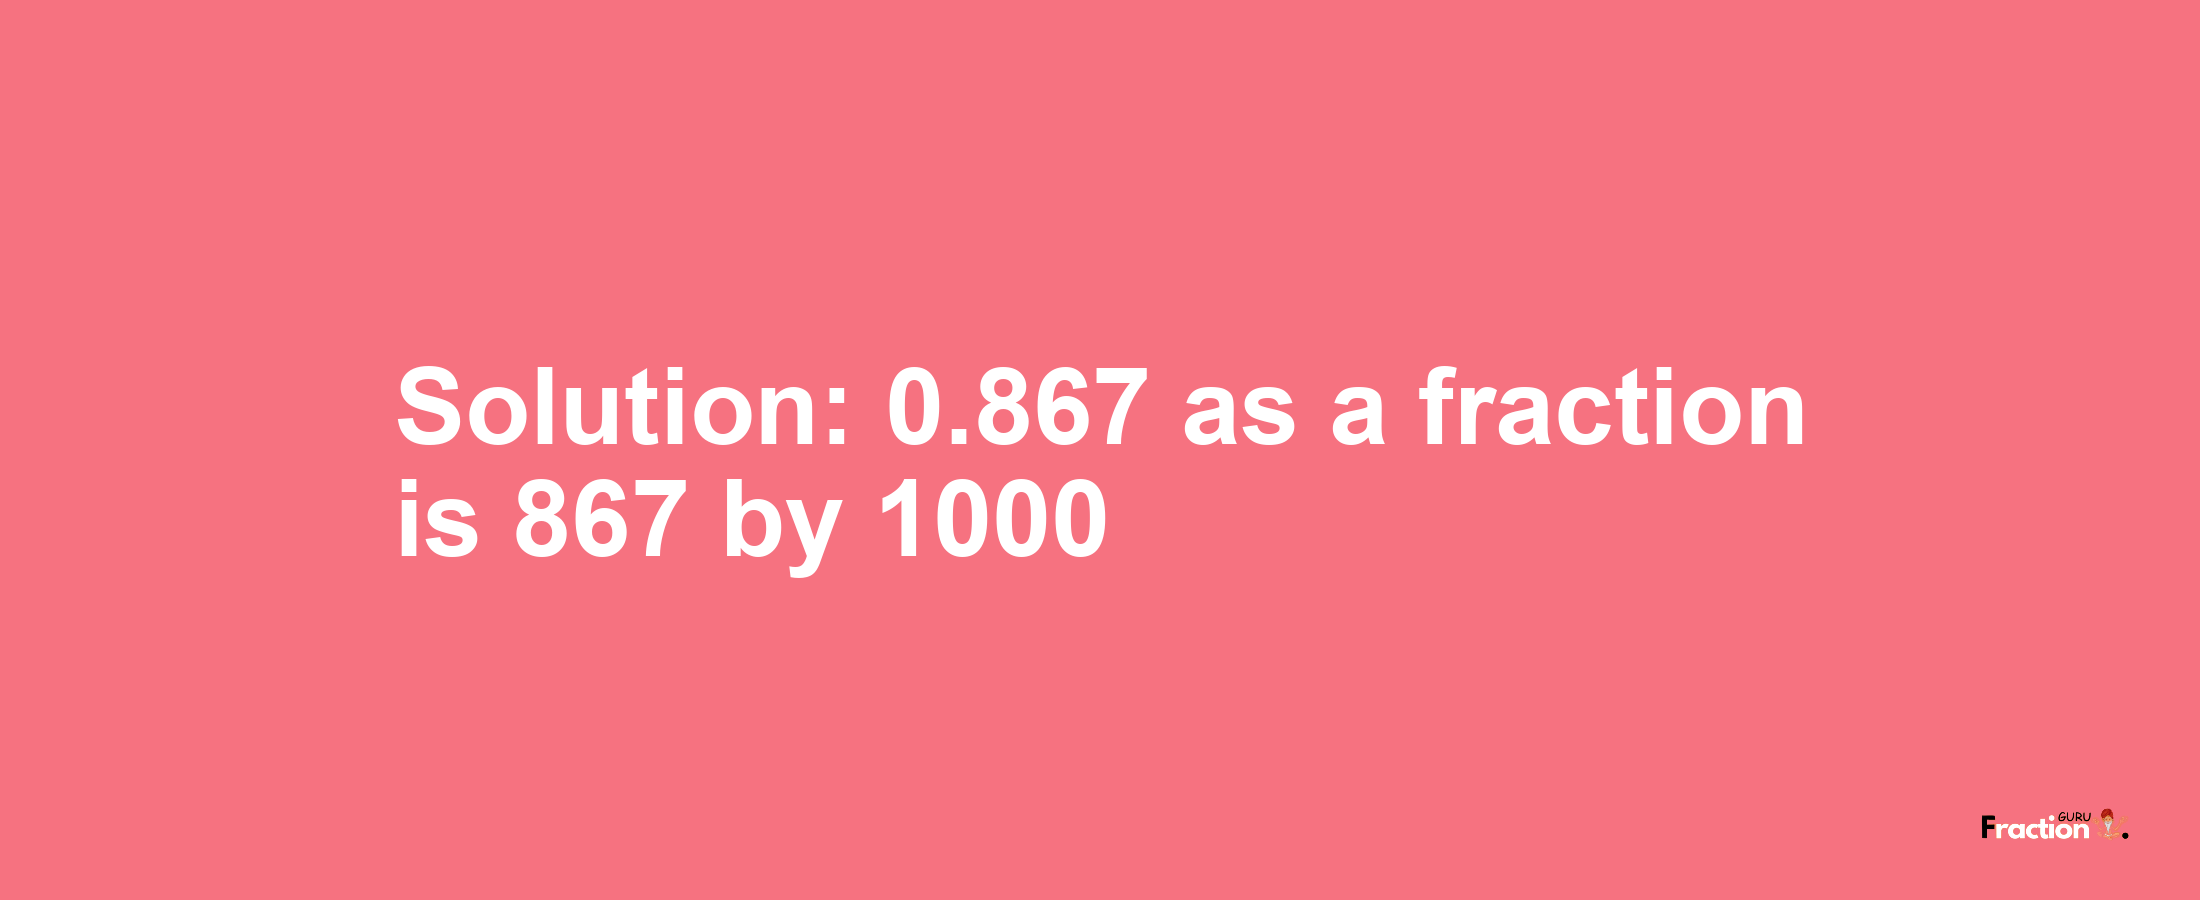 Solution:0.867 as a fraction is 867/1000